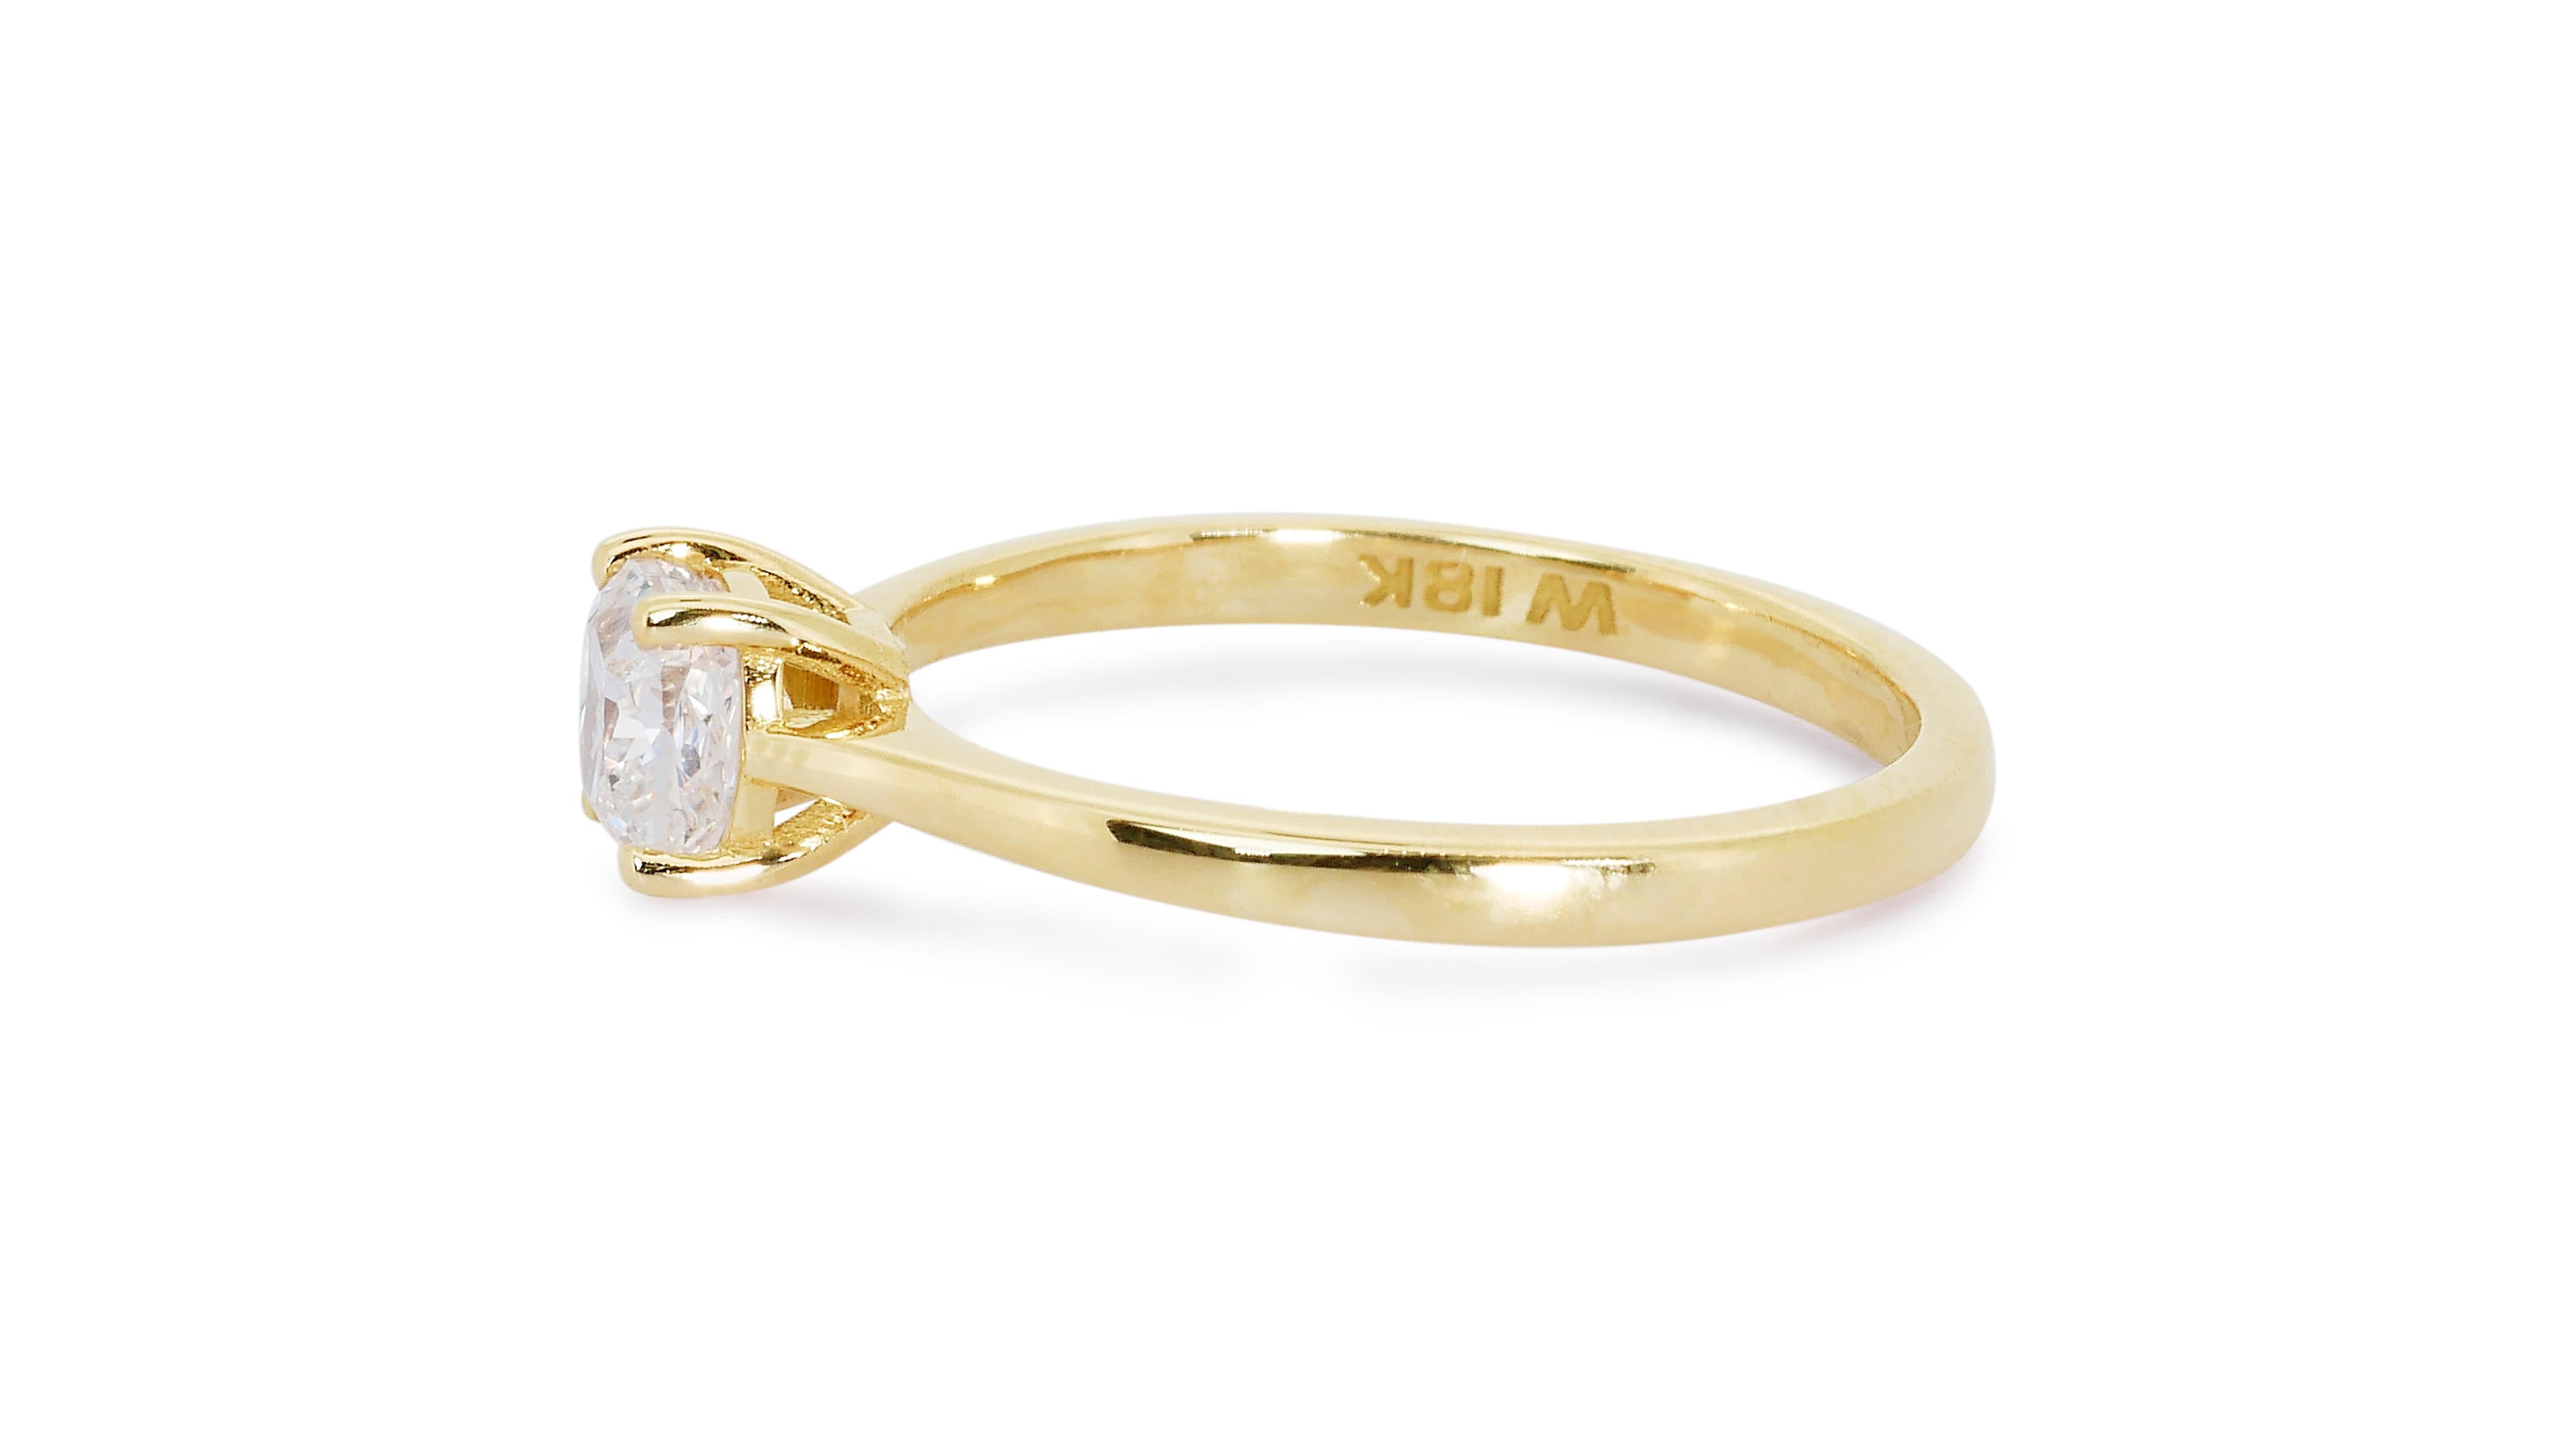 Cushion Cut Glamorous 18k Yellow Gold Solitaire Ring w/ 0.7 Carat Natural Diamonds AIG Cert For Sale